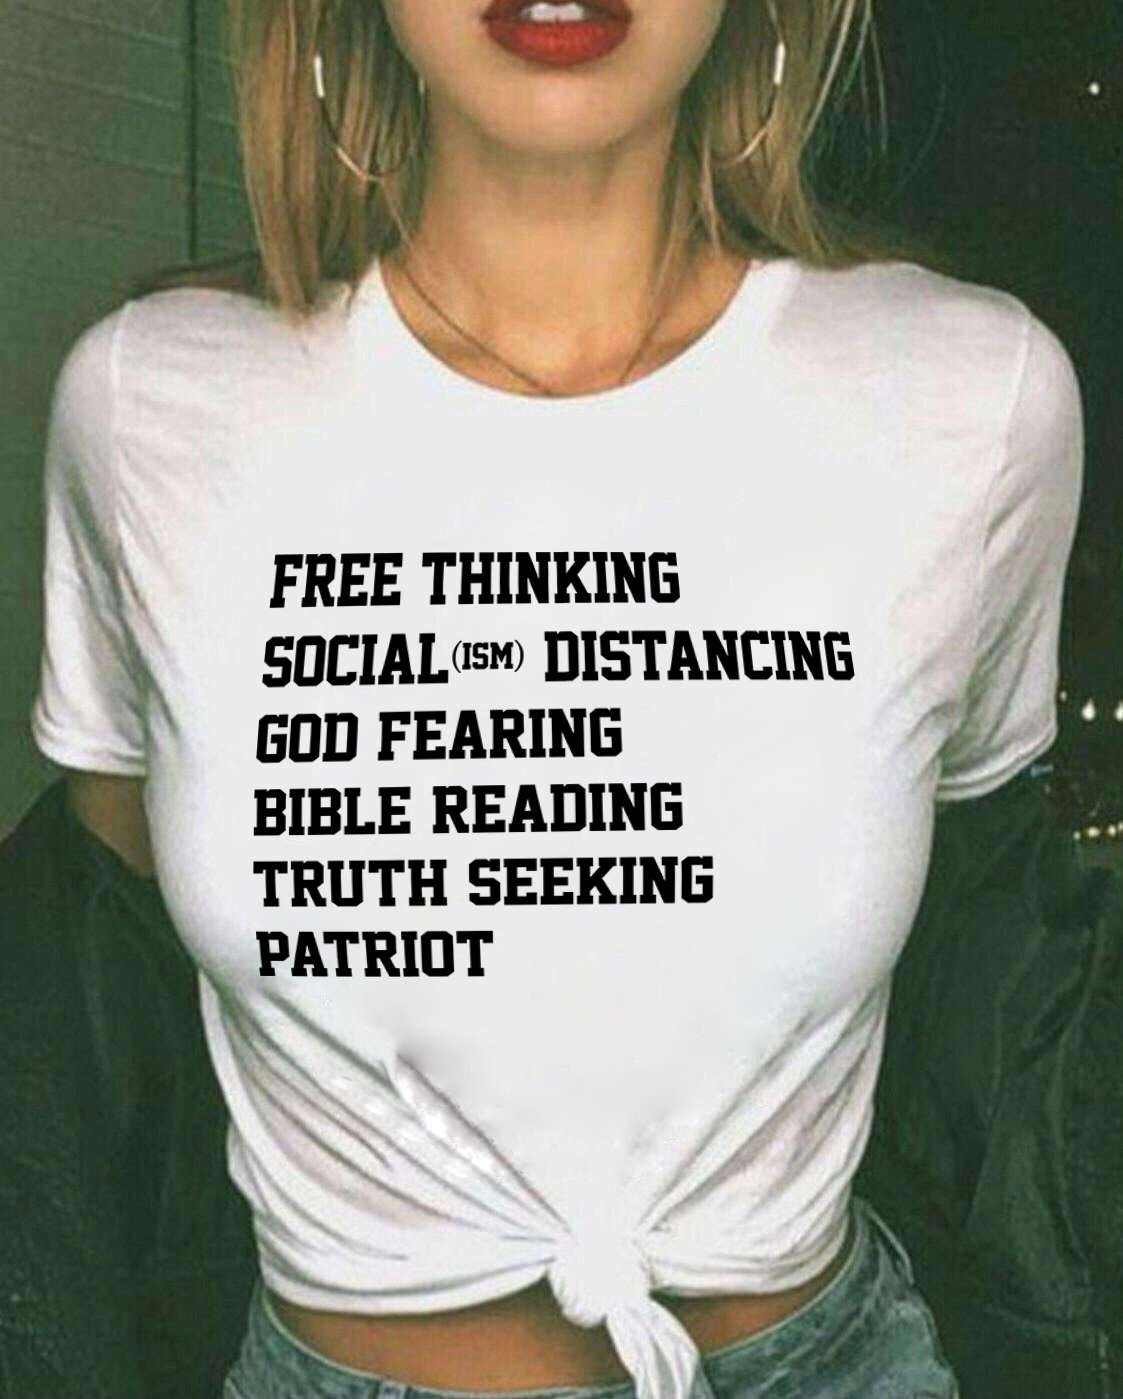 Free thinking, social distancing, god fearing, bible reading, truth seeking patriot